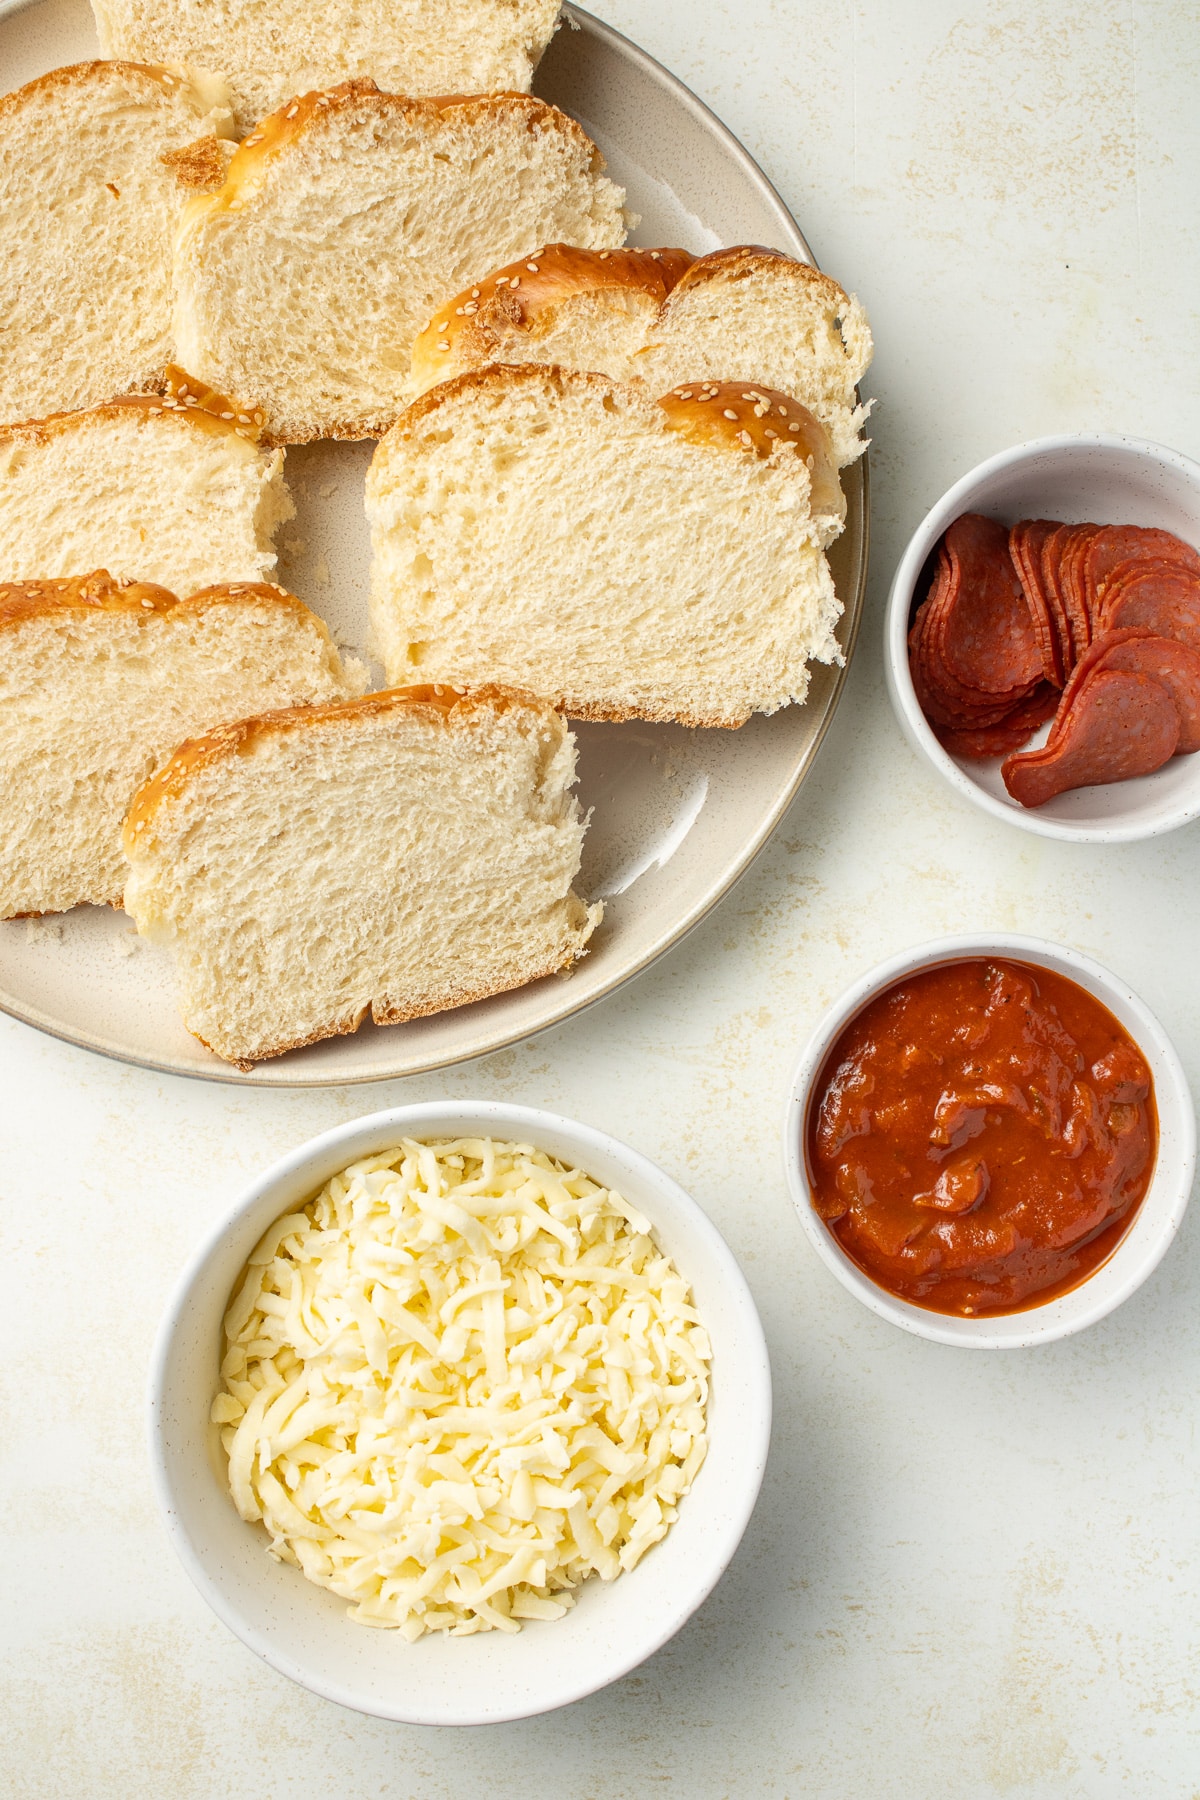 Overhead image of bread, cheese, tomato sauce, and pepperoni on a table.